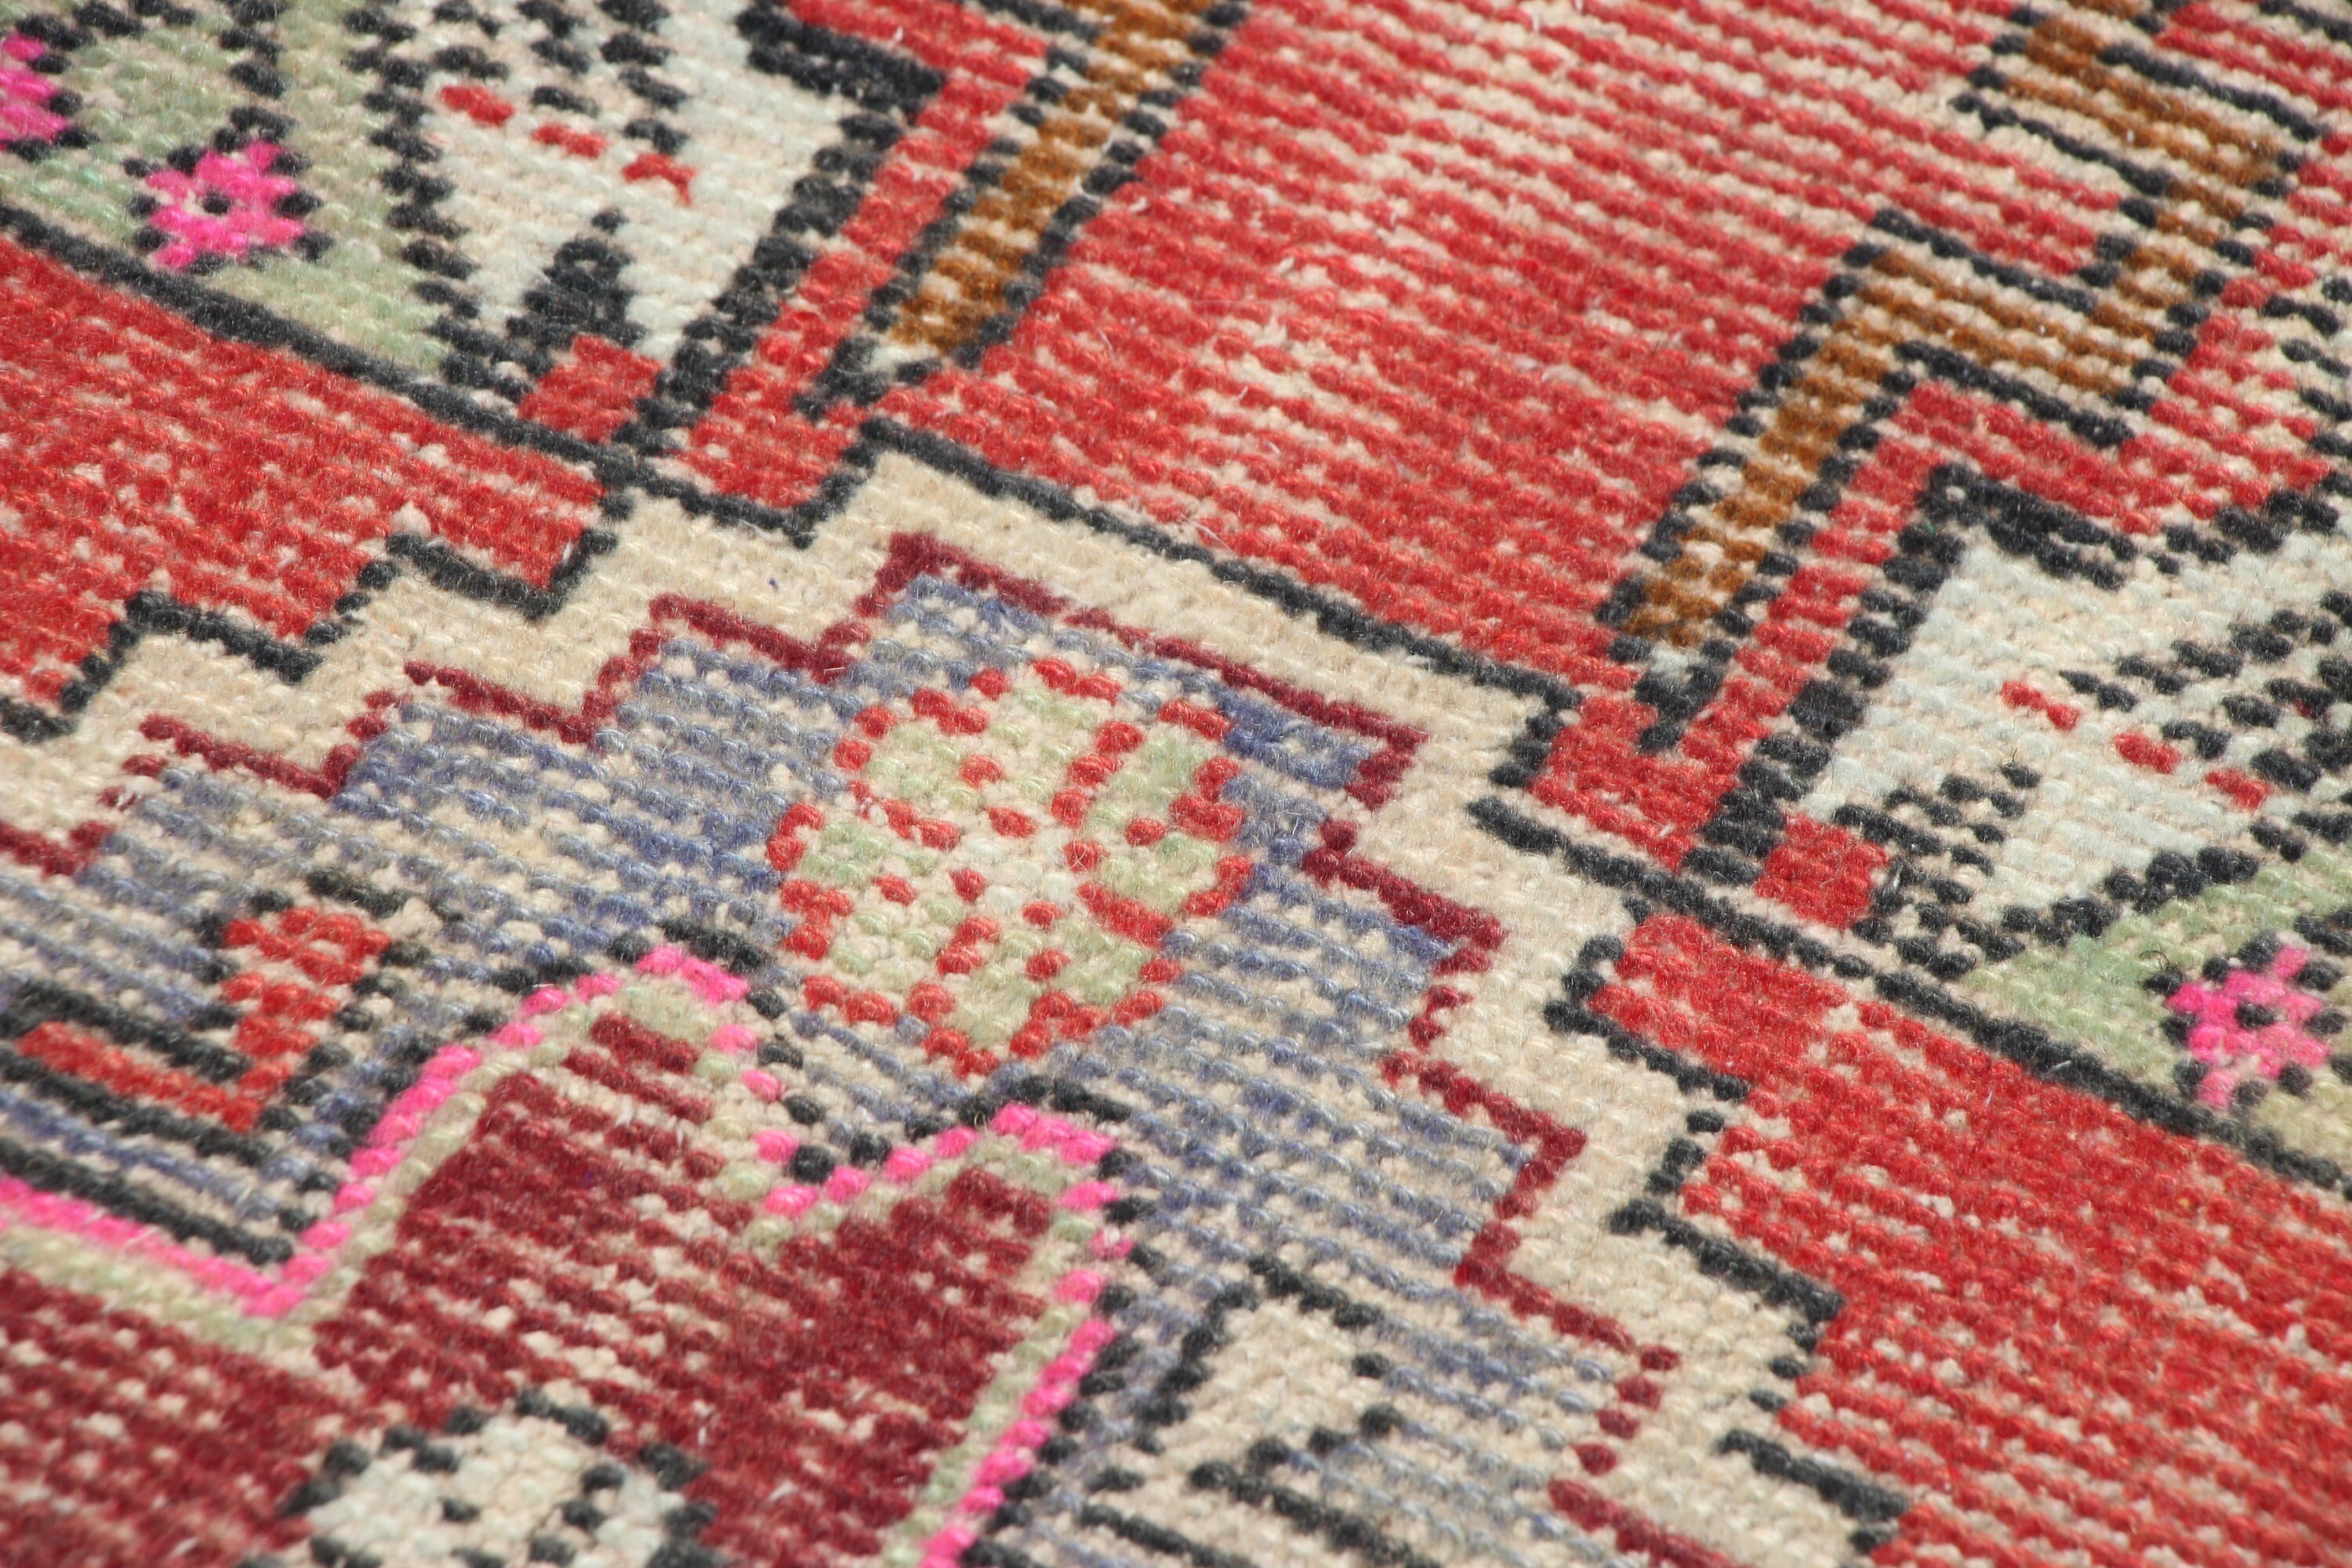 Wall Hanging Rugs, Cool Rug, 1.5x2.9 ft Small Rug, Rugs for Kitchen, Turkish Rug, Vintage Rug, Entry Rug, Red Oriental Rugs, Kitchen Rug